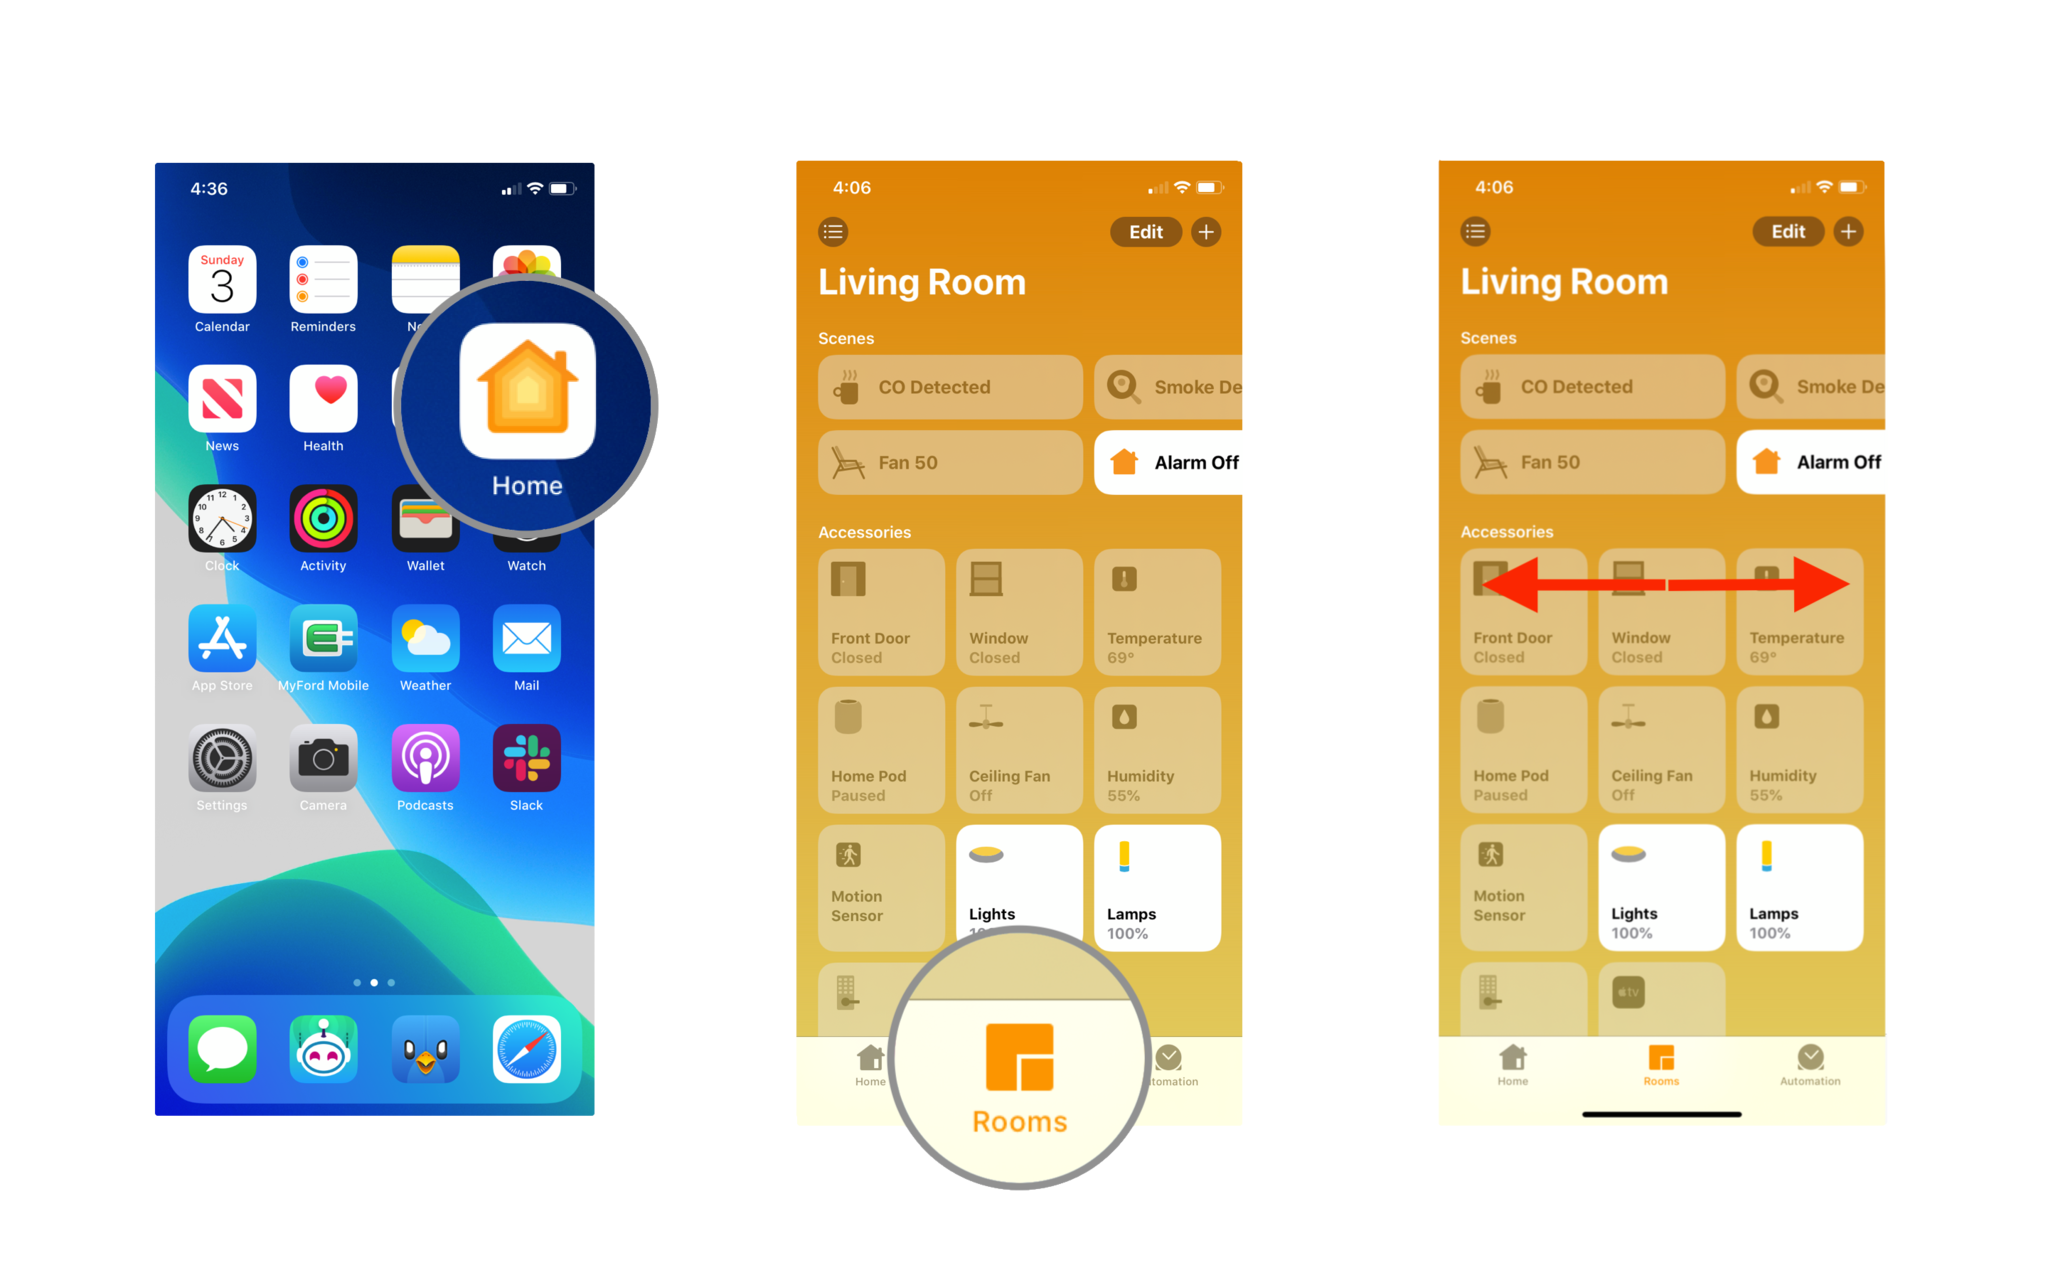 Steps 1-3 depicting how to ungroup accessories in the Home app